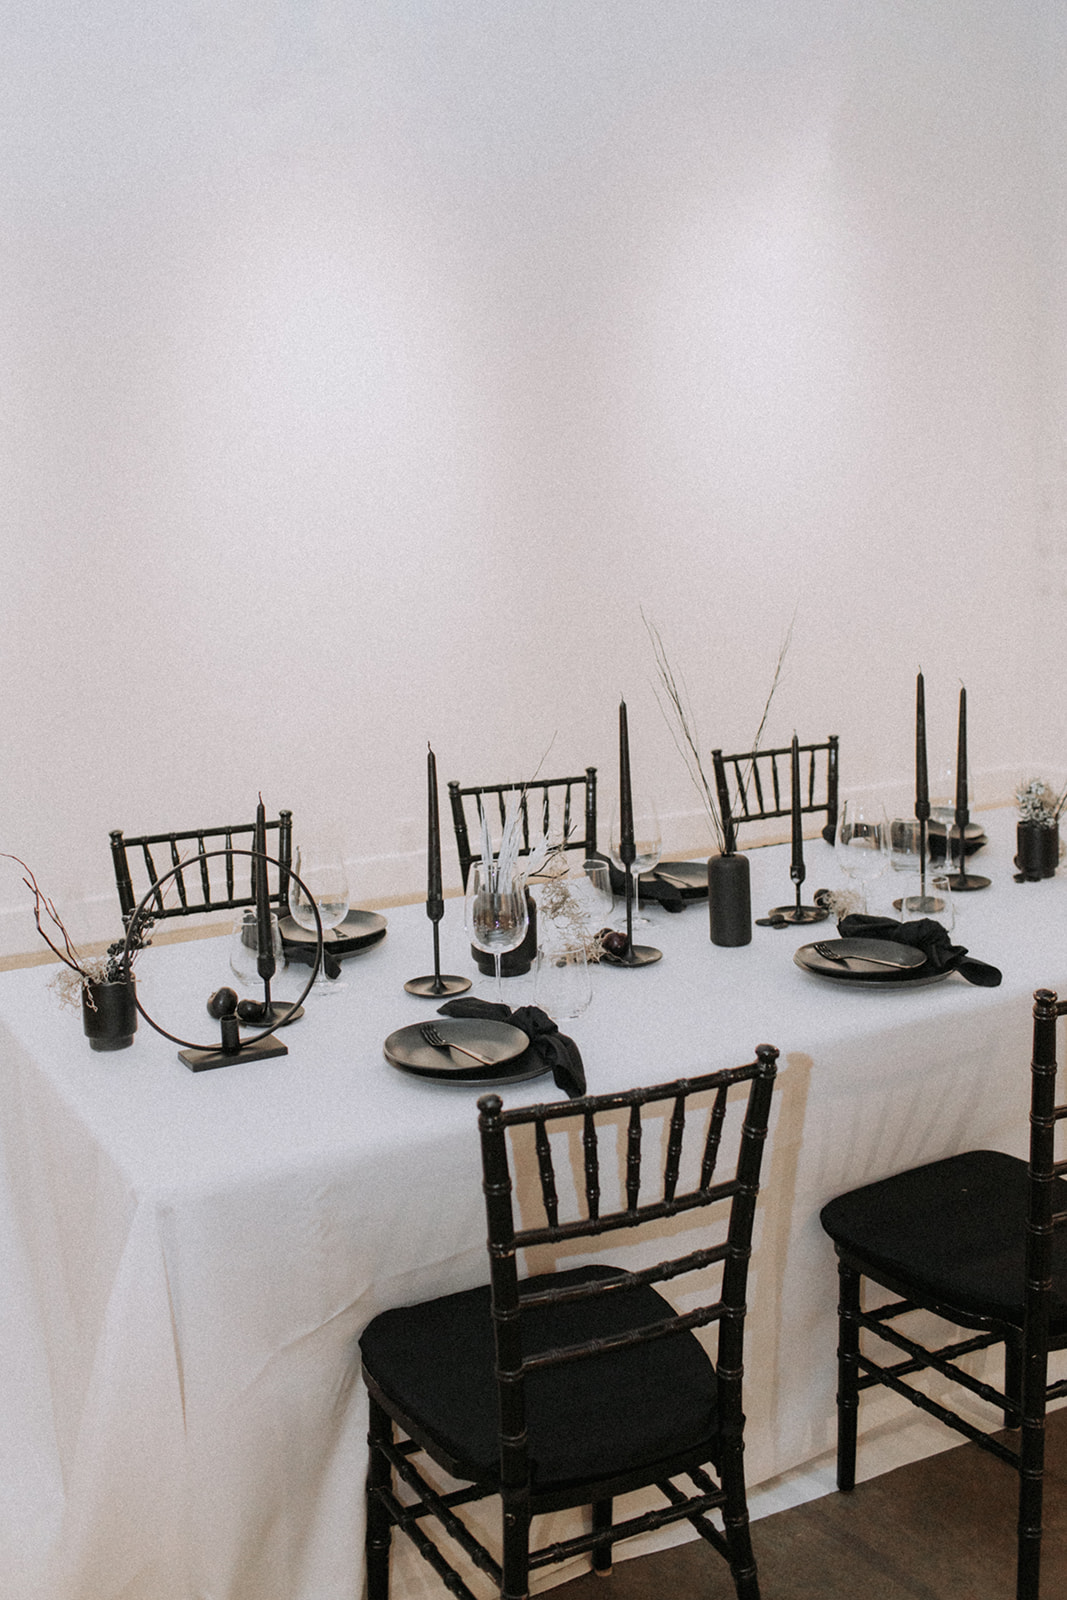 Modern & Moody All-Black Editorial at The Pioneer || featured on the Brontë Bride Blog || modern black alternative wedding inspiration in downtown Calgary Alberta at The Pioneer on 8th, modern black tablescape